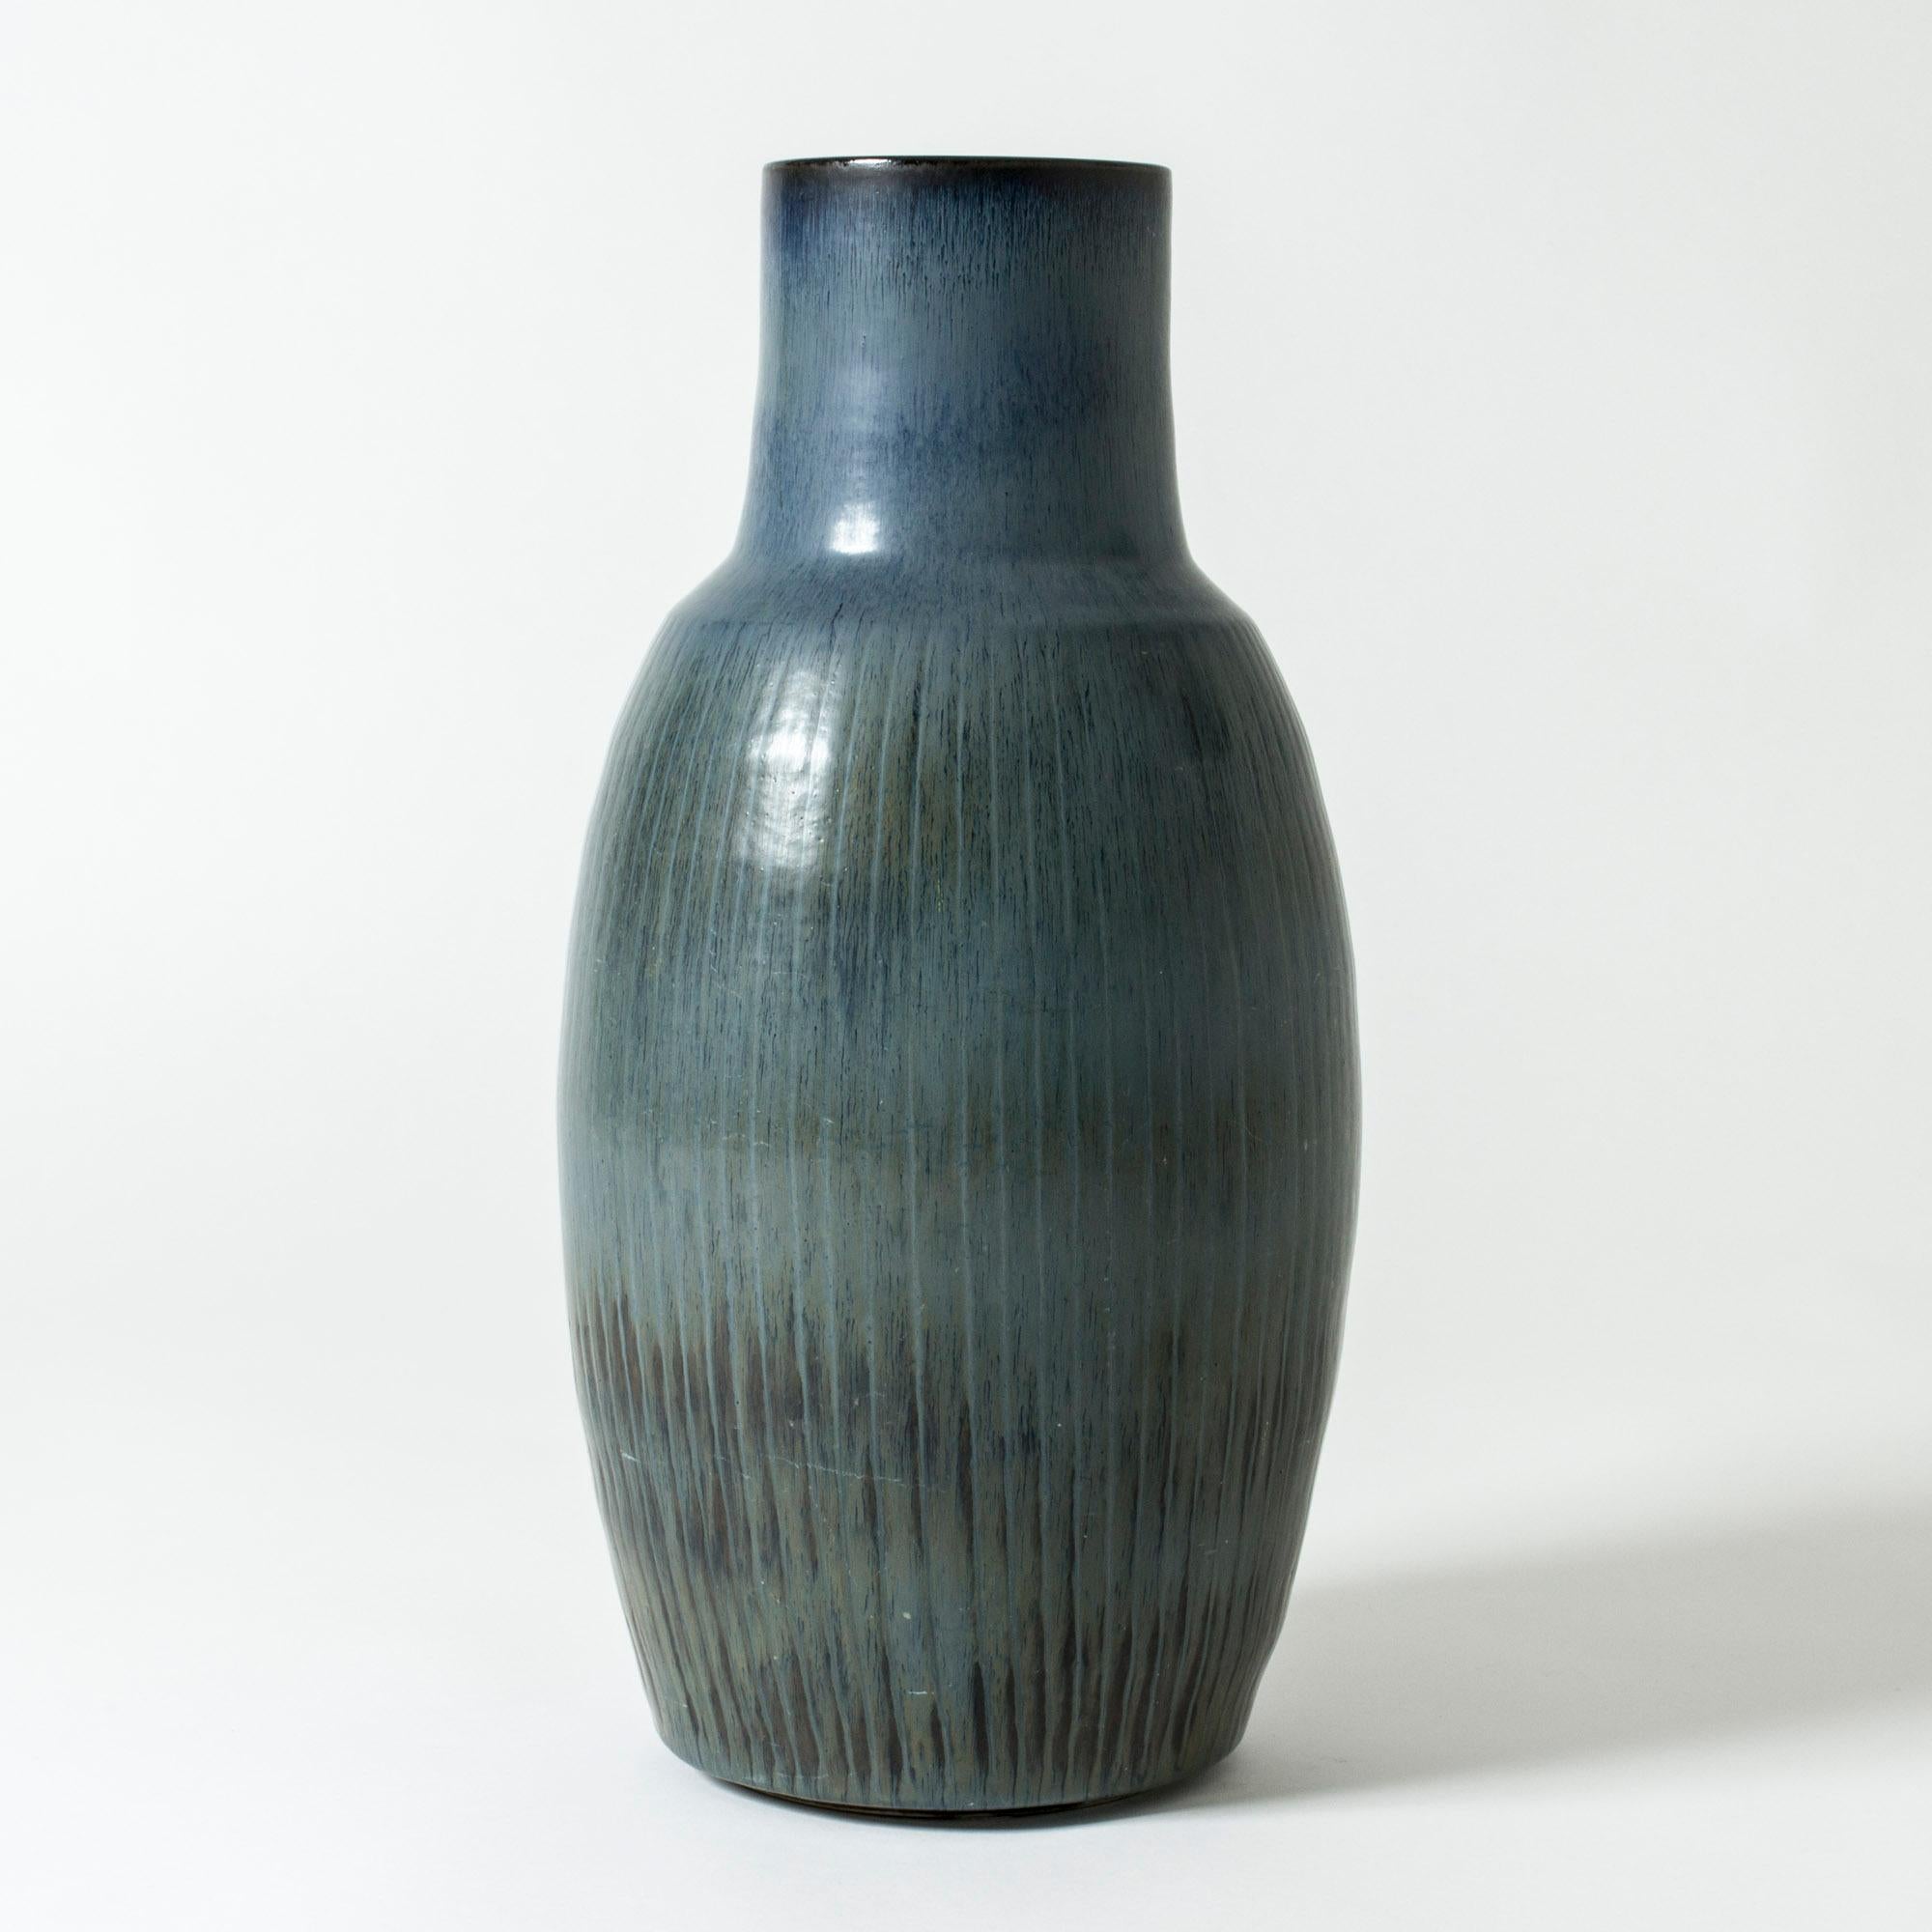 Large stoneware floor vase by Carl-Harry Stålhane in a stout form with dark petroleum colored glaze. Pattern of embossed stripes.

Carl-Harry Stålhane was one of the stars among Swedish ceramic artists during the 1950s, 1960s and 1970s, whose